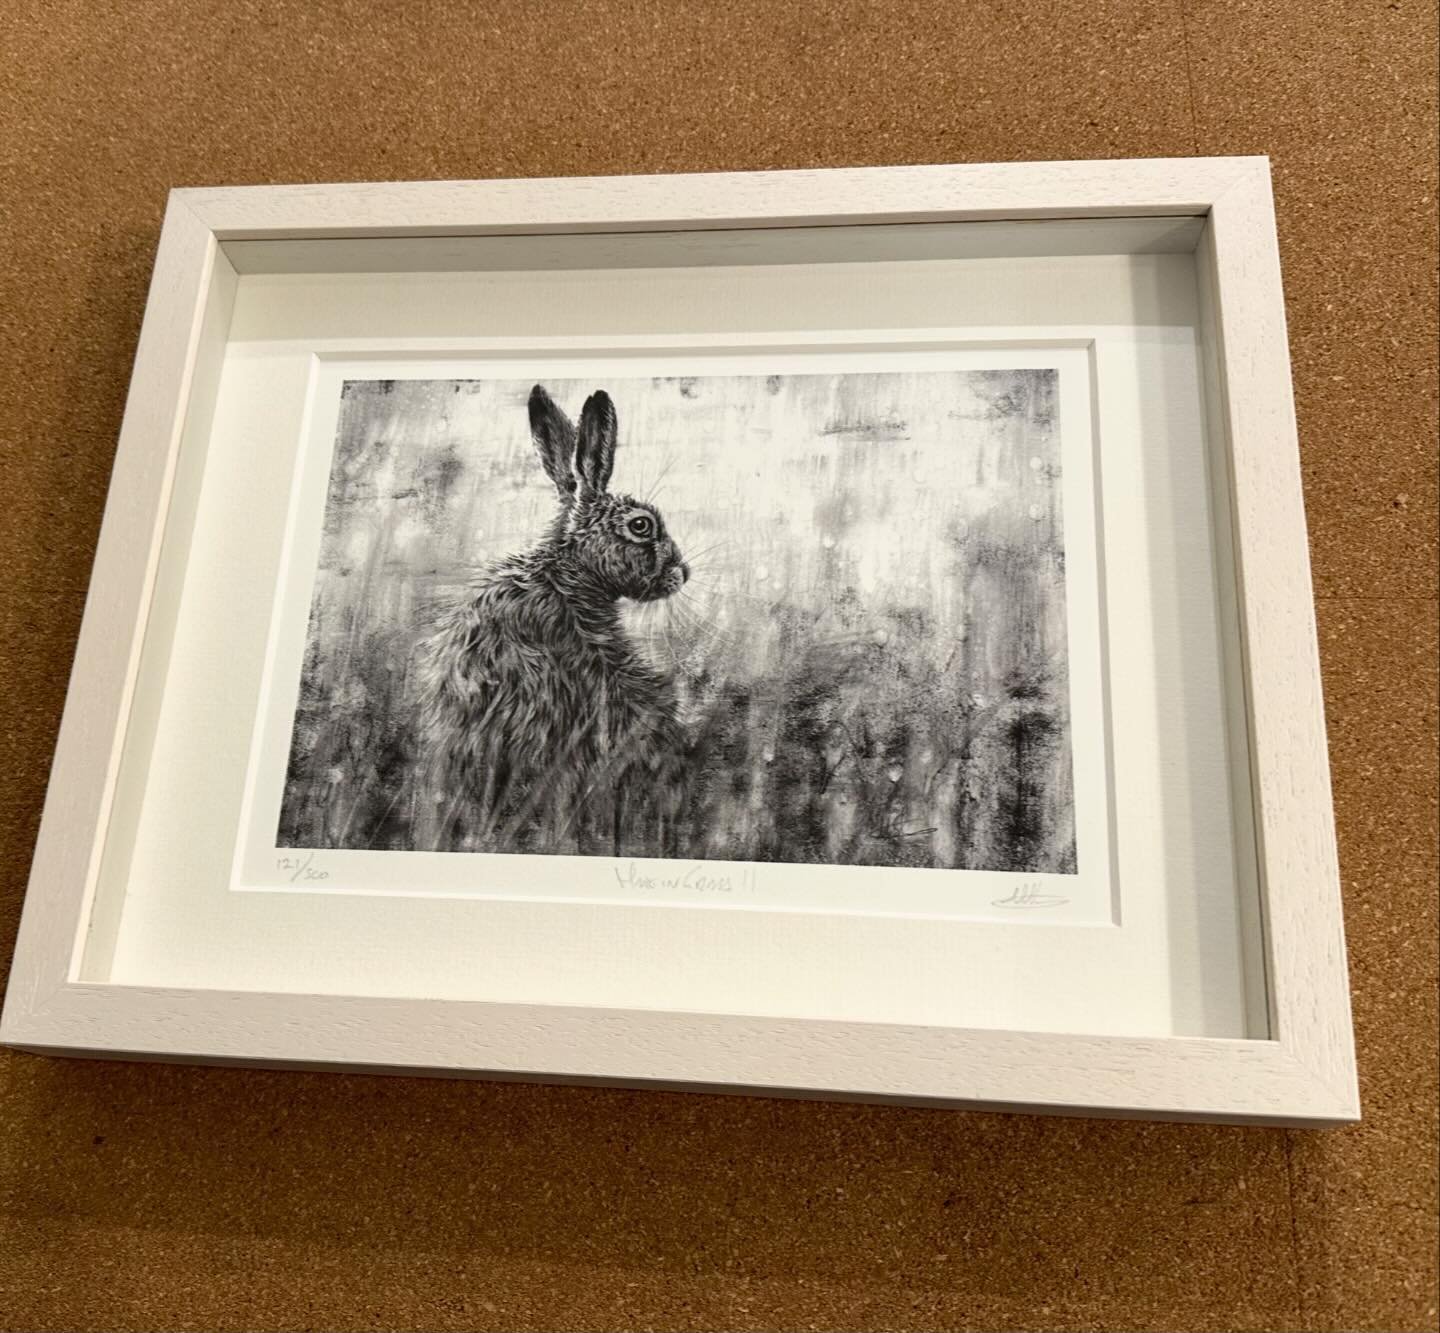 &lsquo;Hare in Grass II&rsquo; limited edition print framed in an off-white moulding, mounted and set back in the frame.